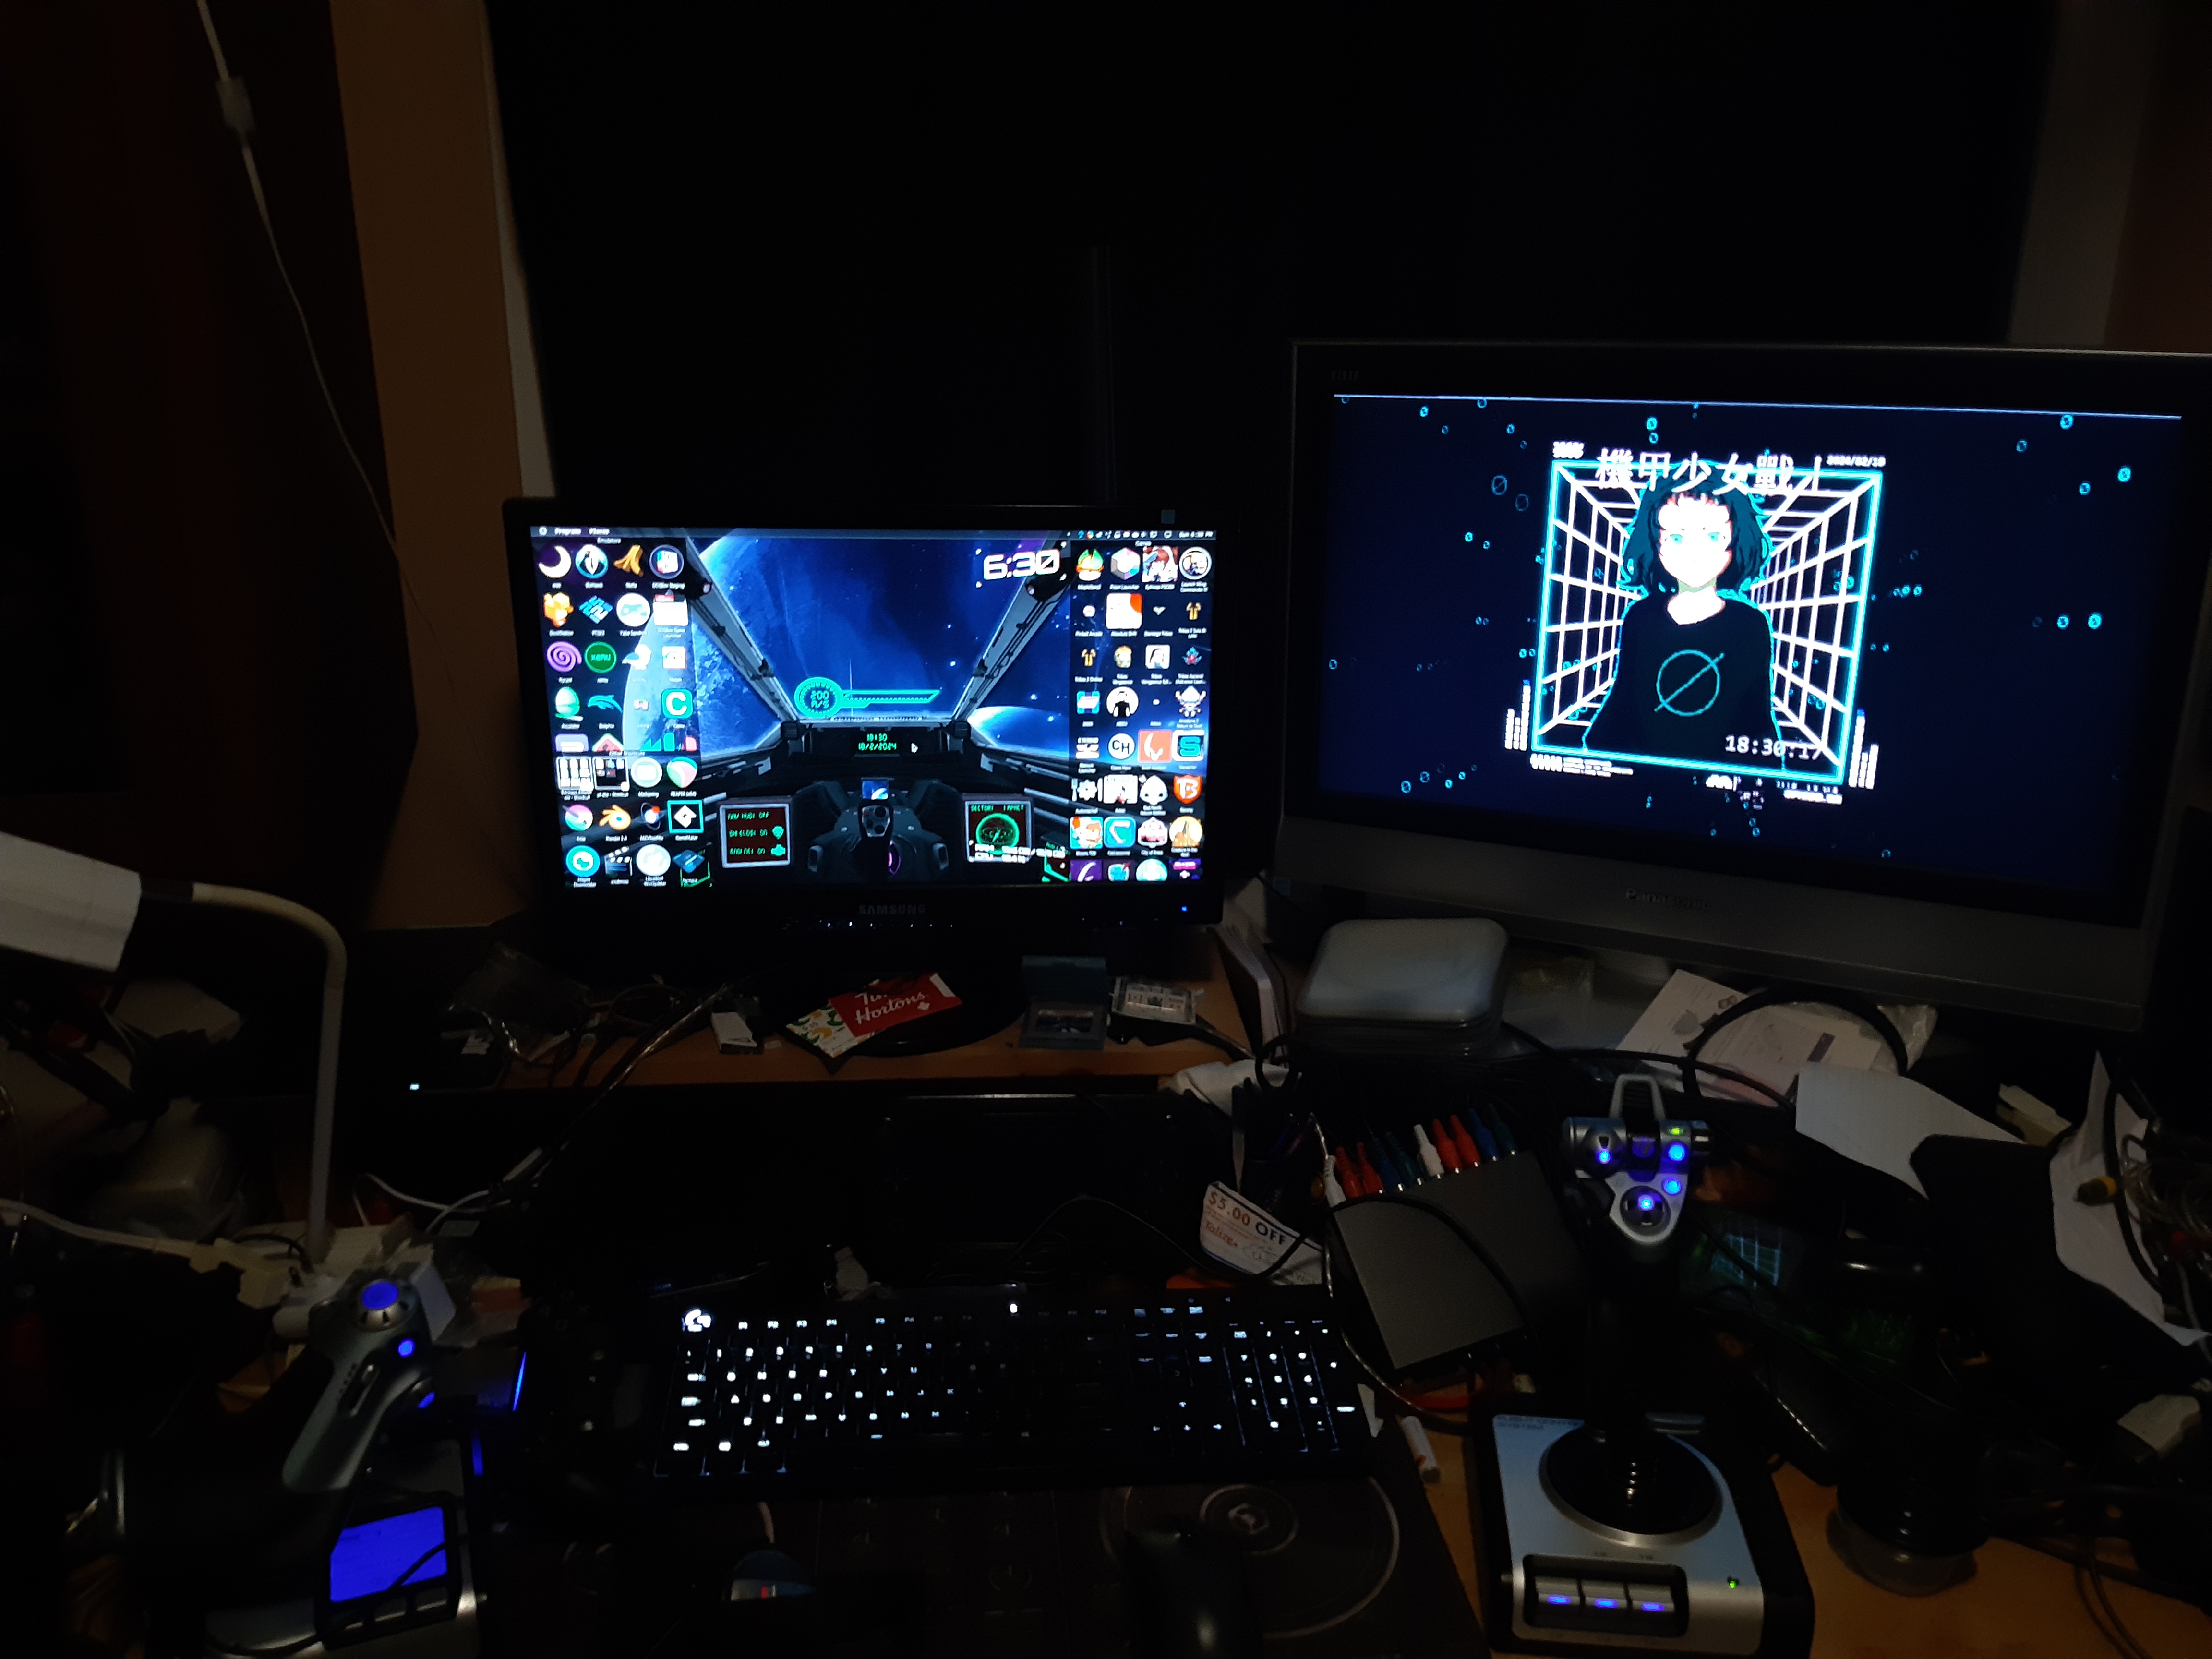 real-life picture of the same desktops, showing the backlit keyboard, the obscene mess on the desk and a HOTAS flightstick